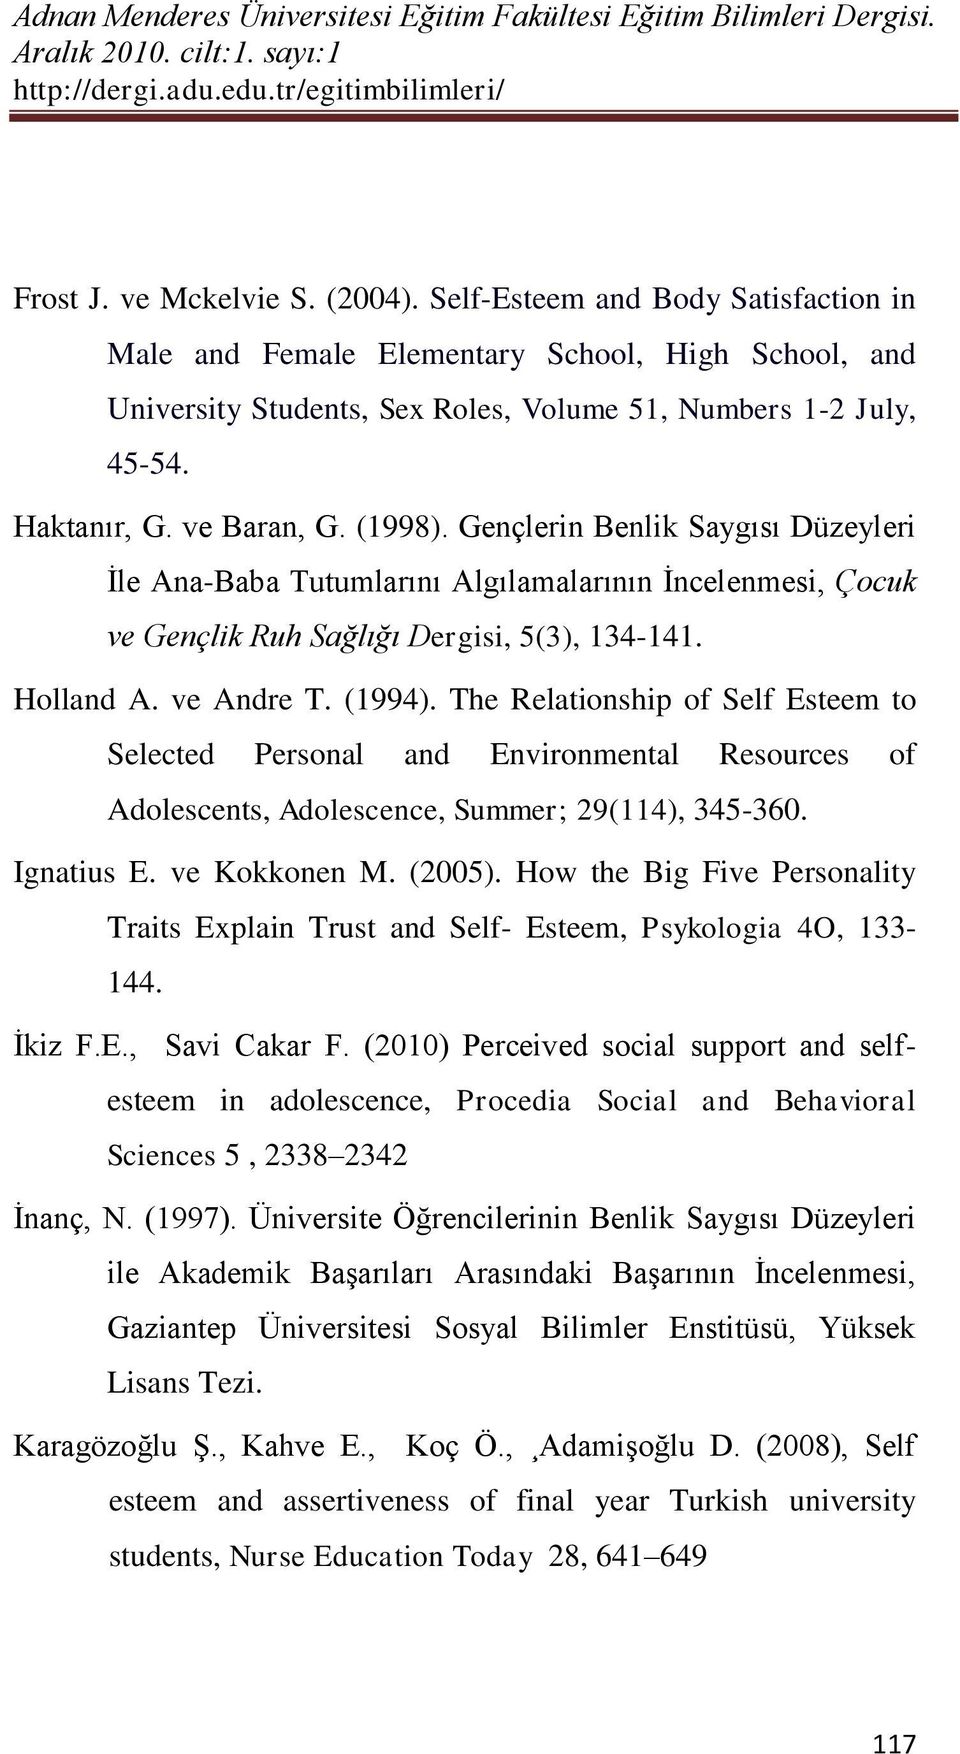 (1994). The Relationship of Self Esteem to Selected Personal and Environmental Resources of Adolescents, Adolescence, Summer; 29(114), 345-360. Ignatius E. ve Kokkonen M. (2005).